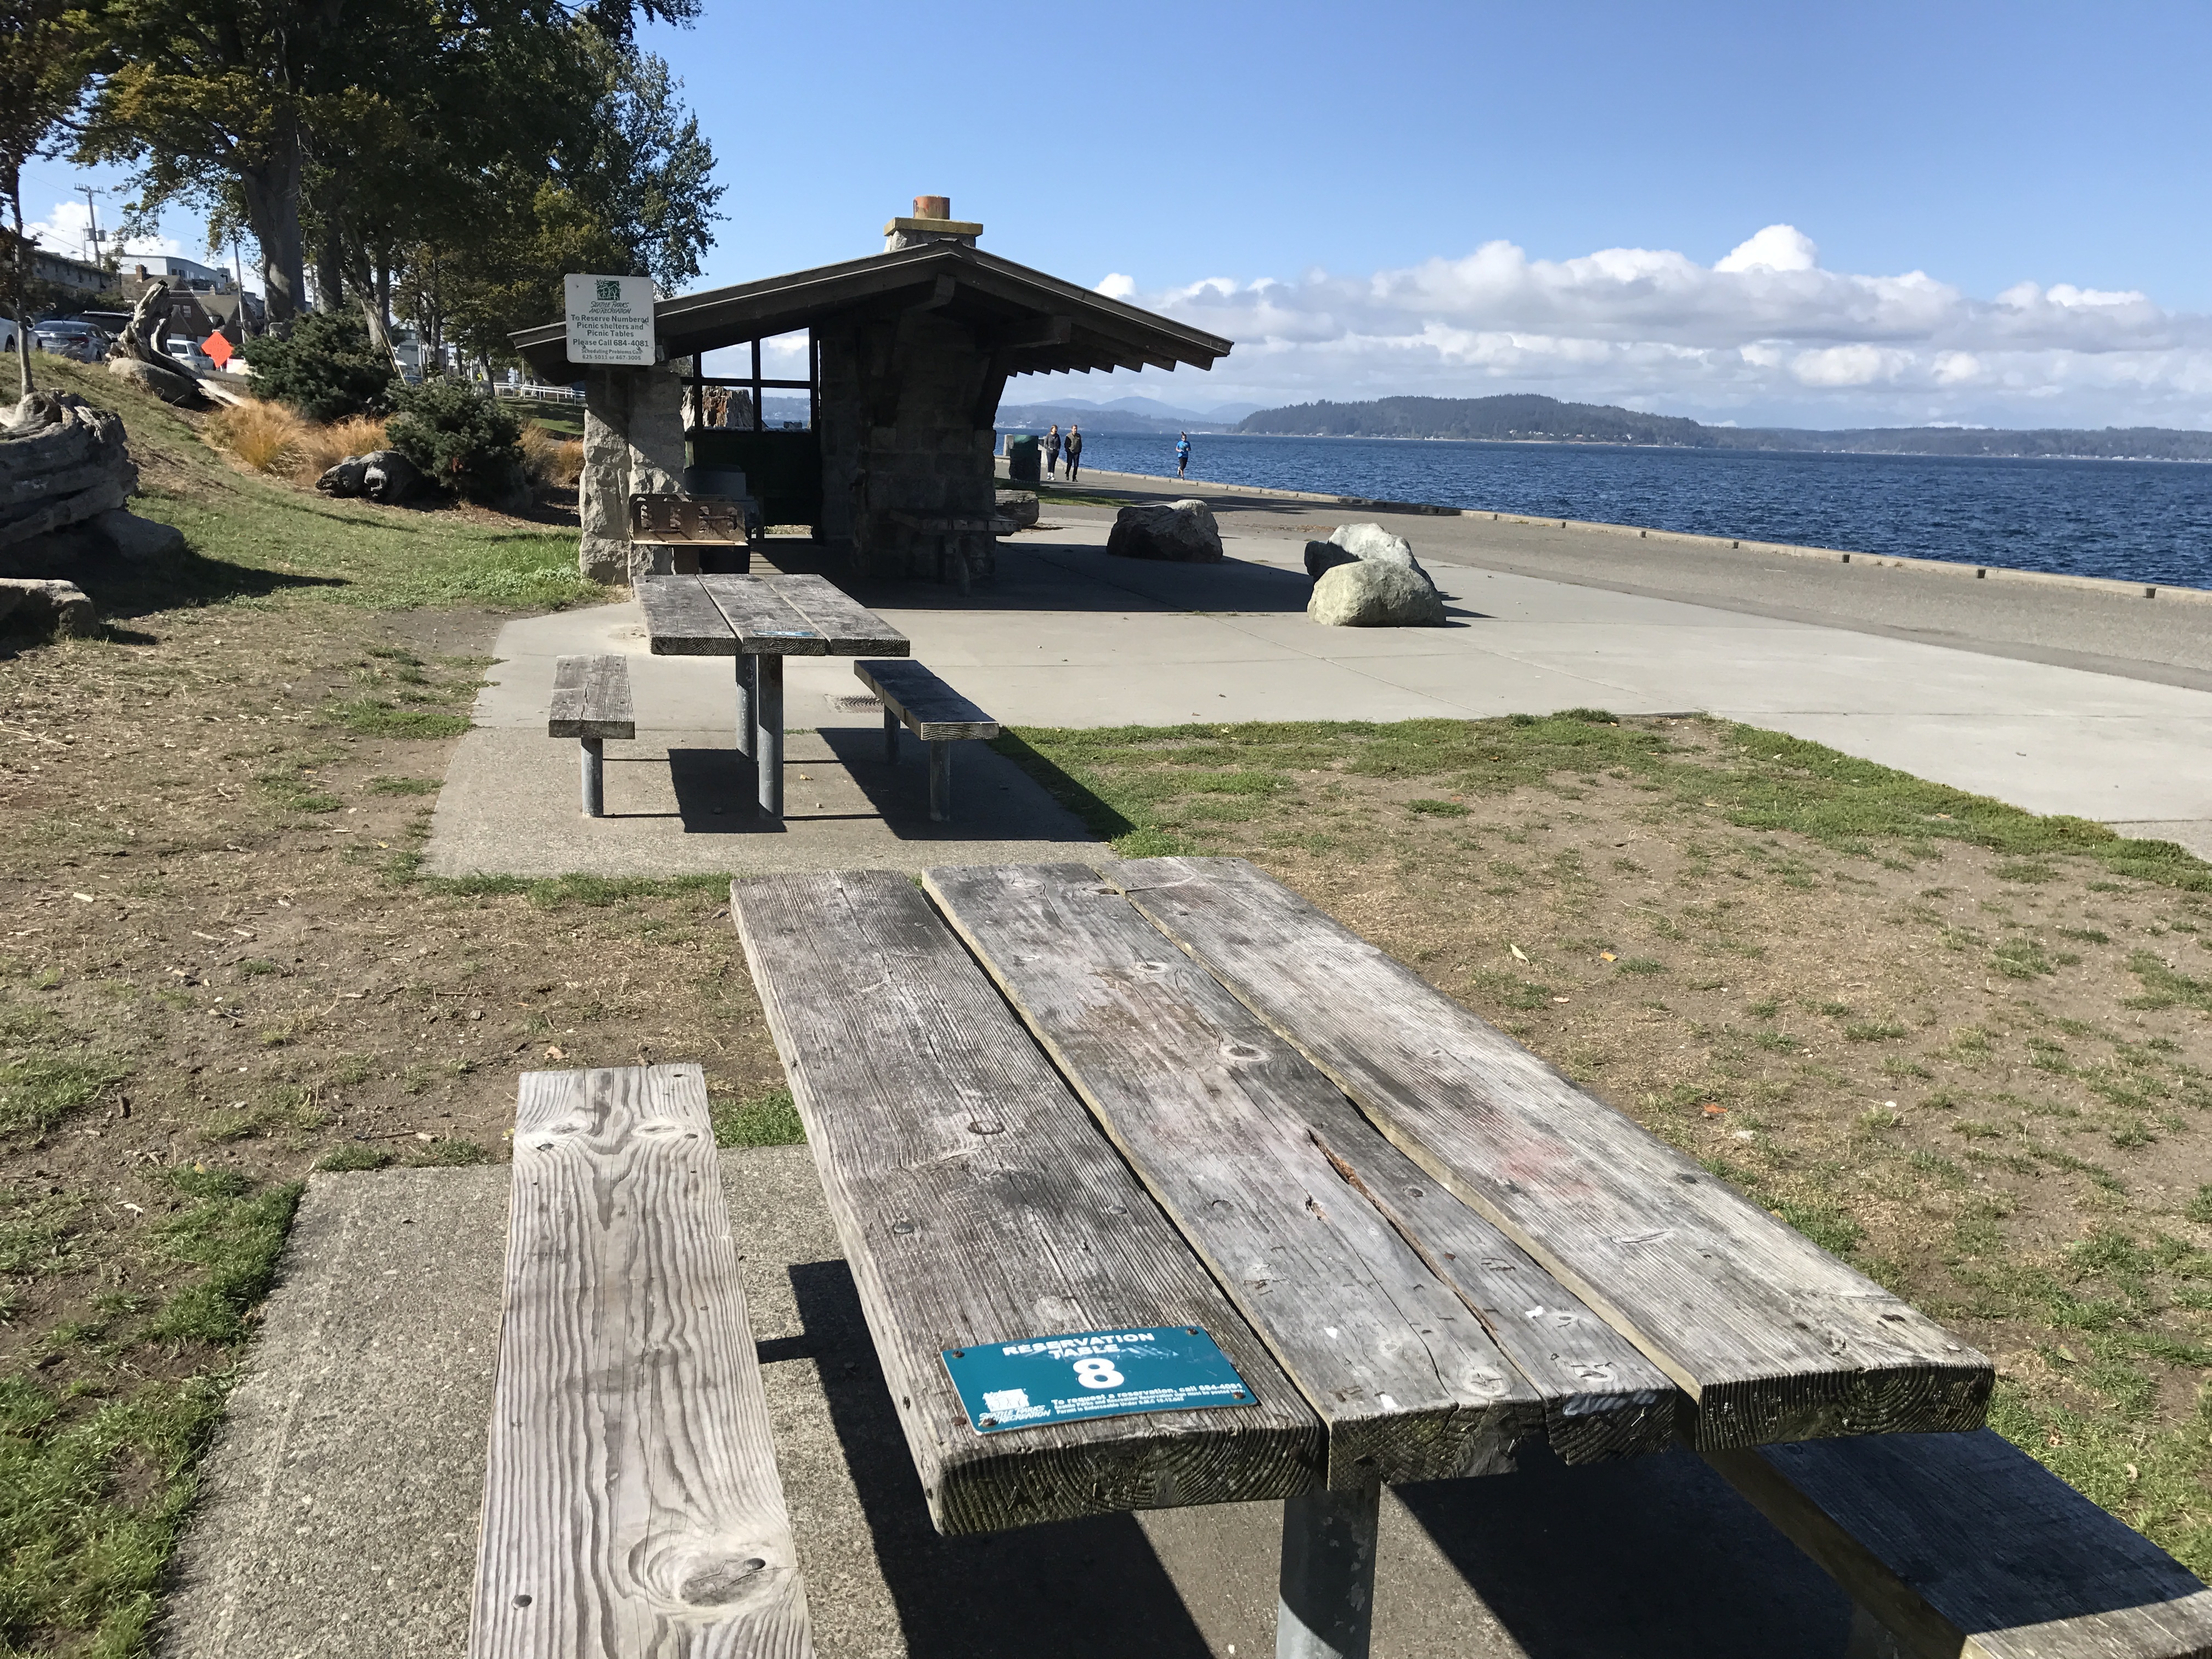 Two picnic tables and a picnic shelter along a beach.